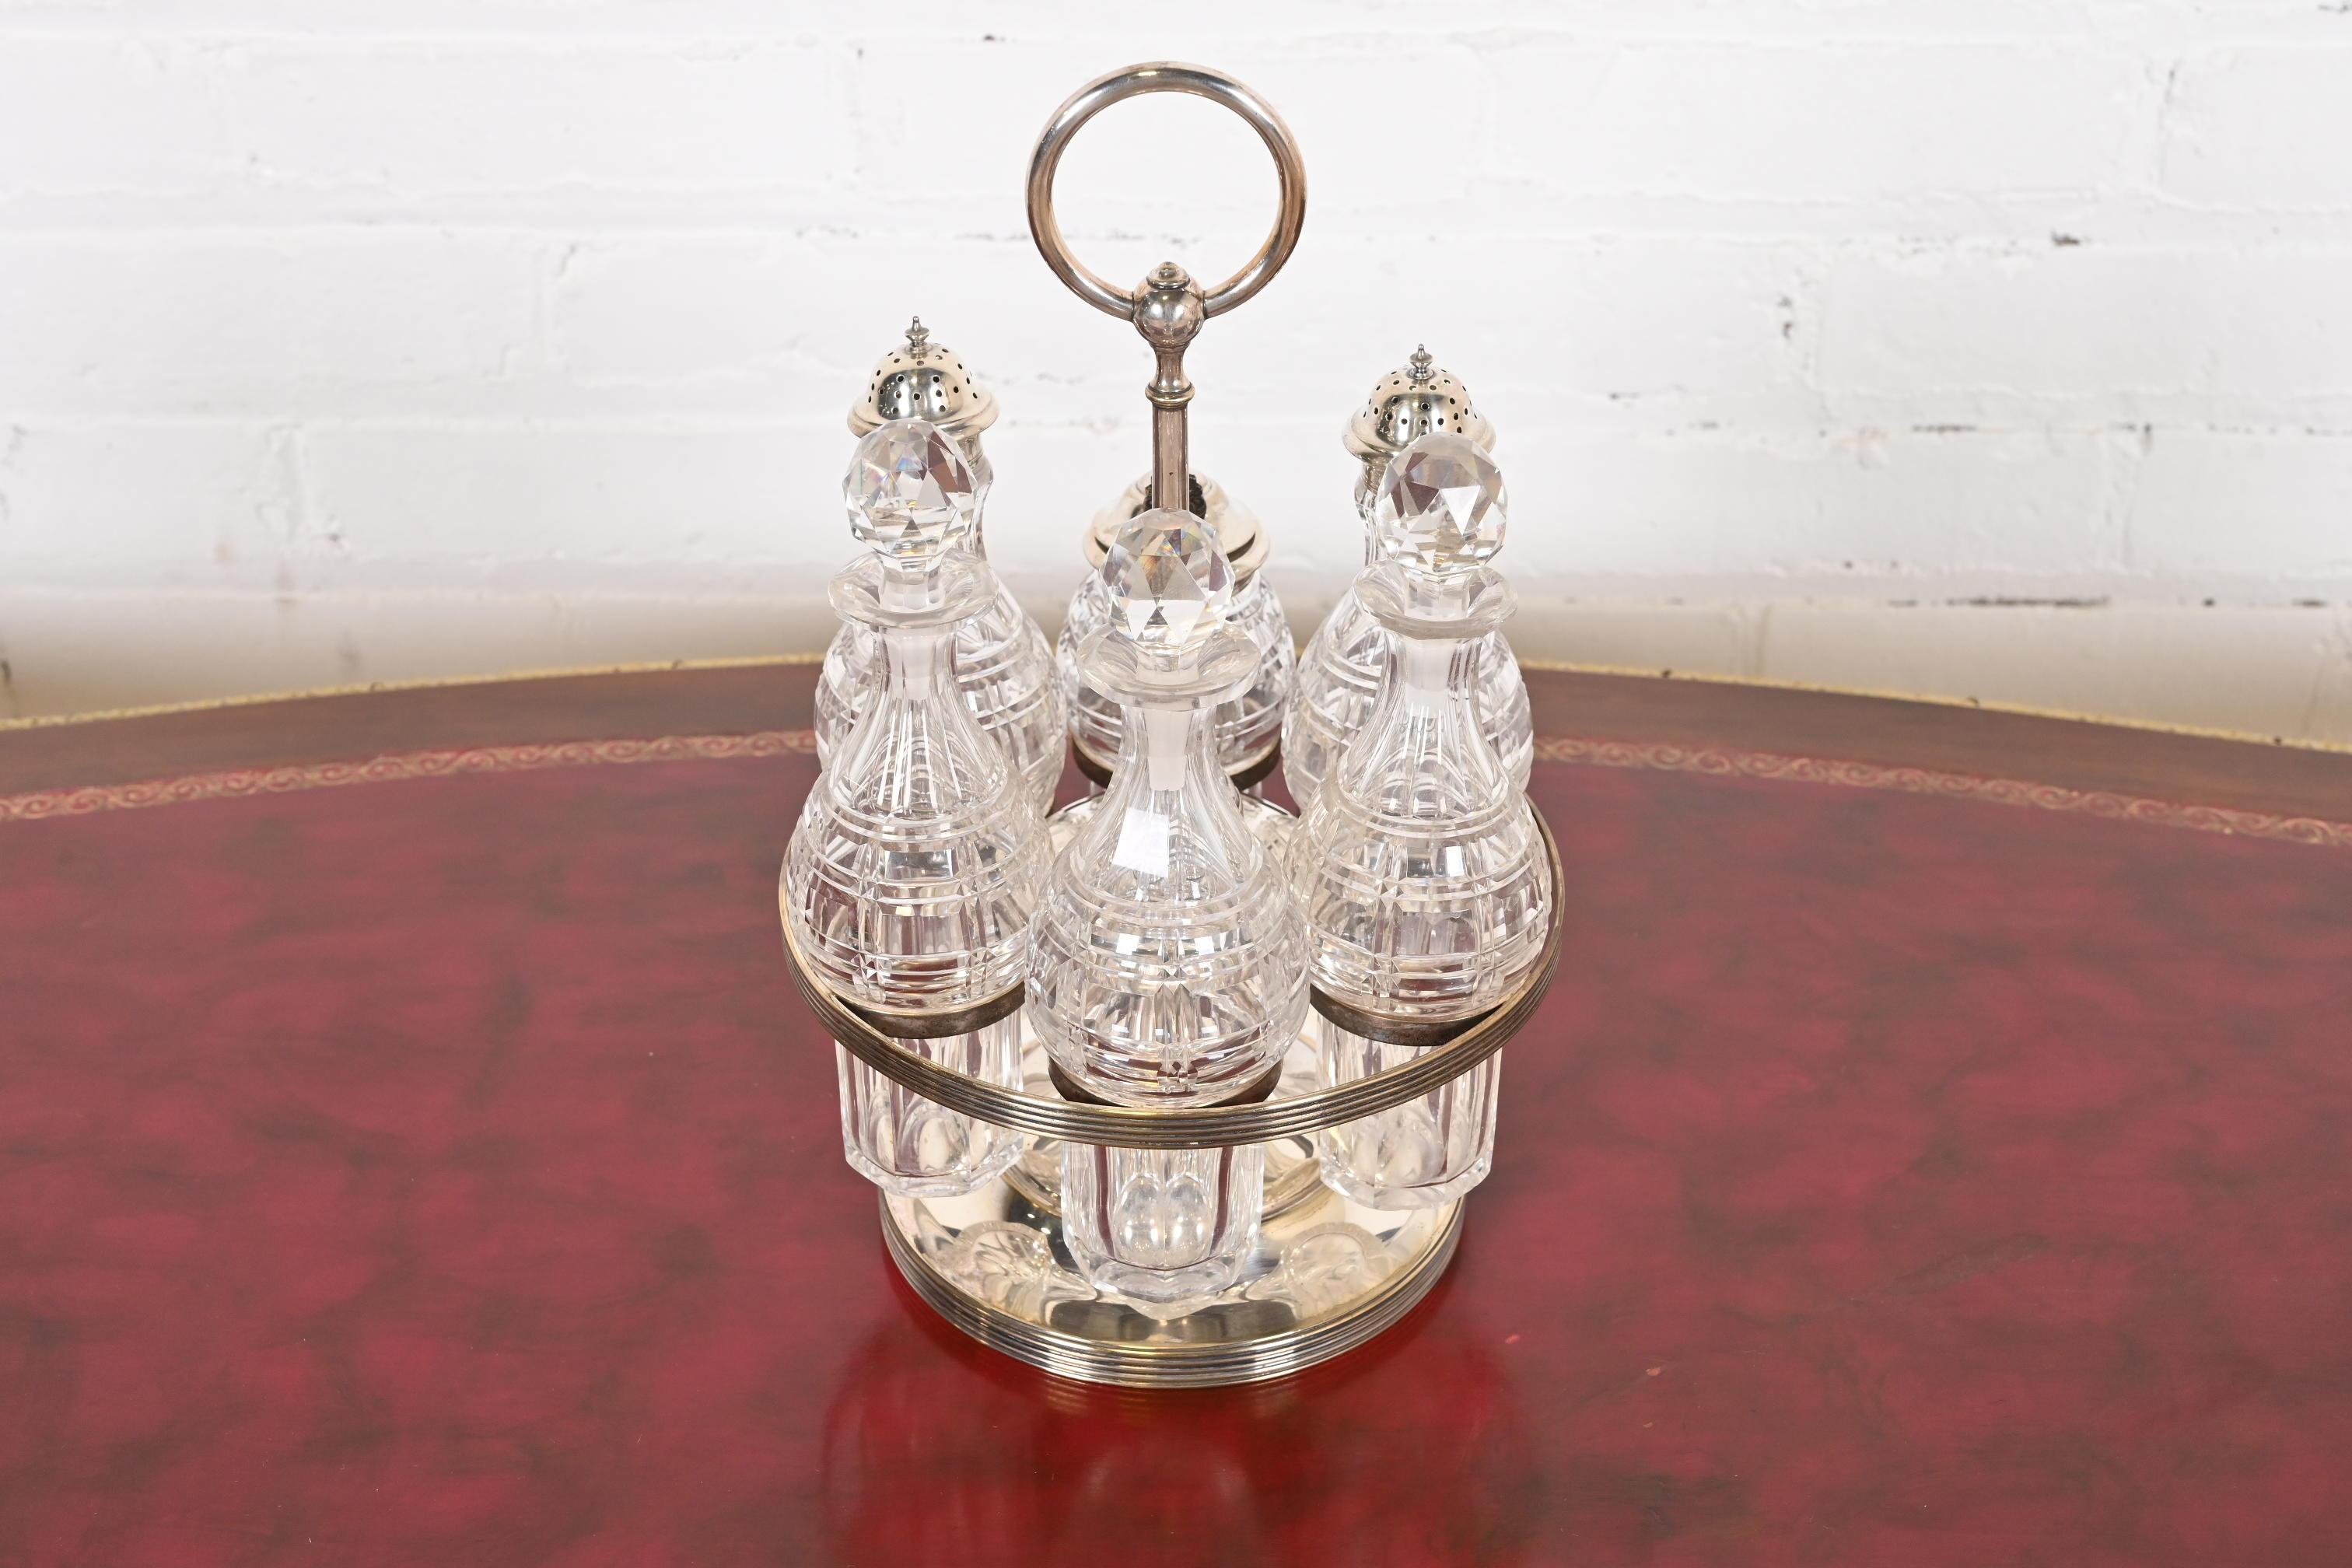 Tiffany & Co. Antique Silver Plate and Crystal Seven-Piece Cruet Set For Sale 2